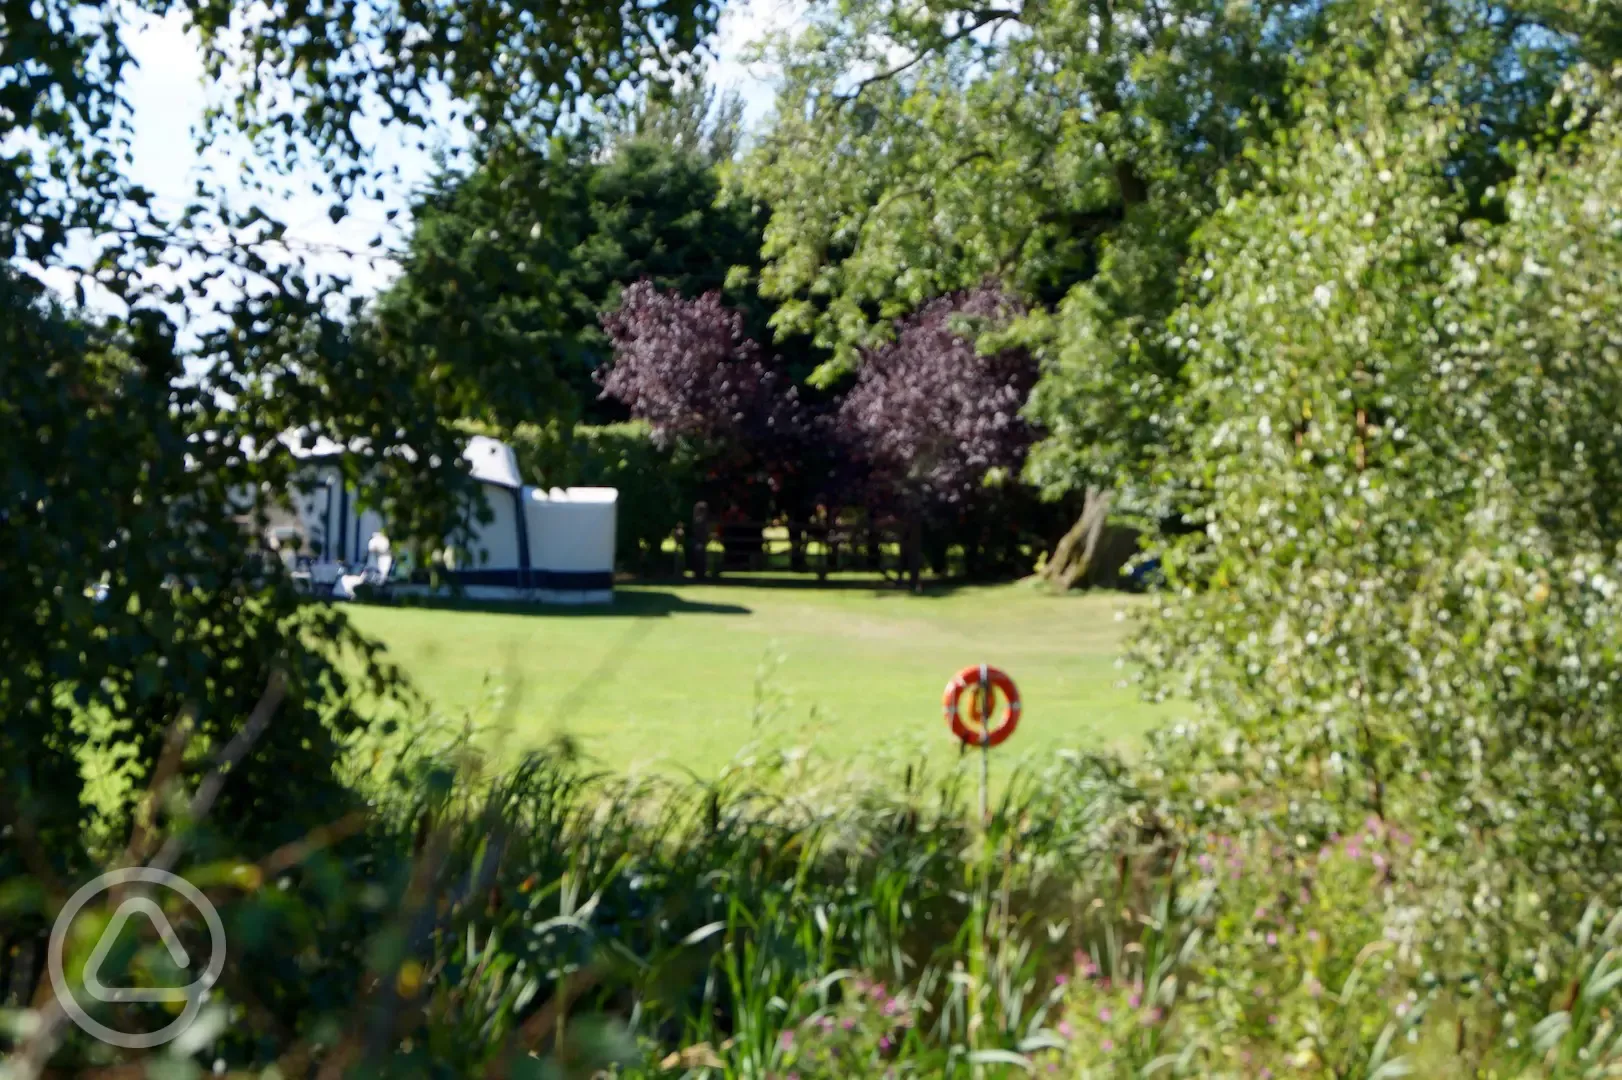 View from behind pond to Motorhome pitch along side gate